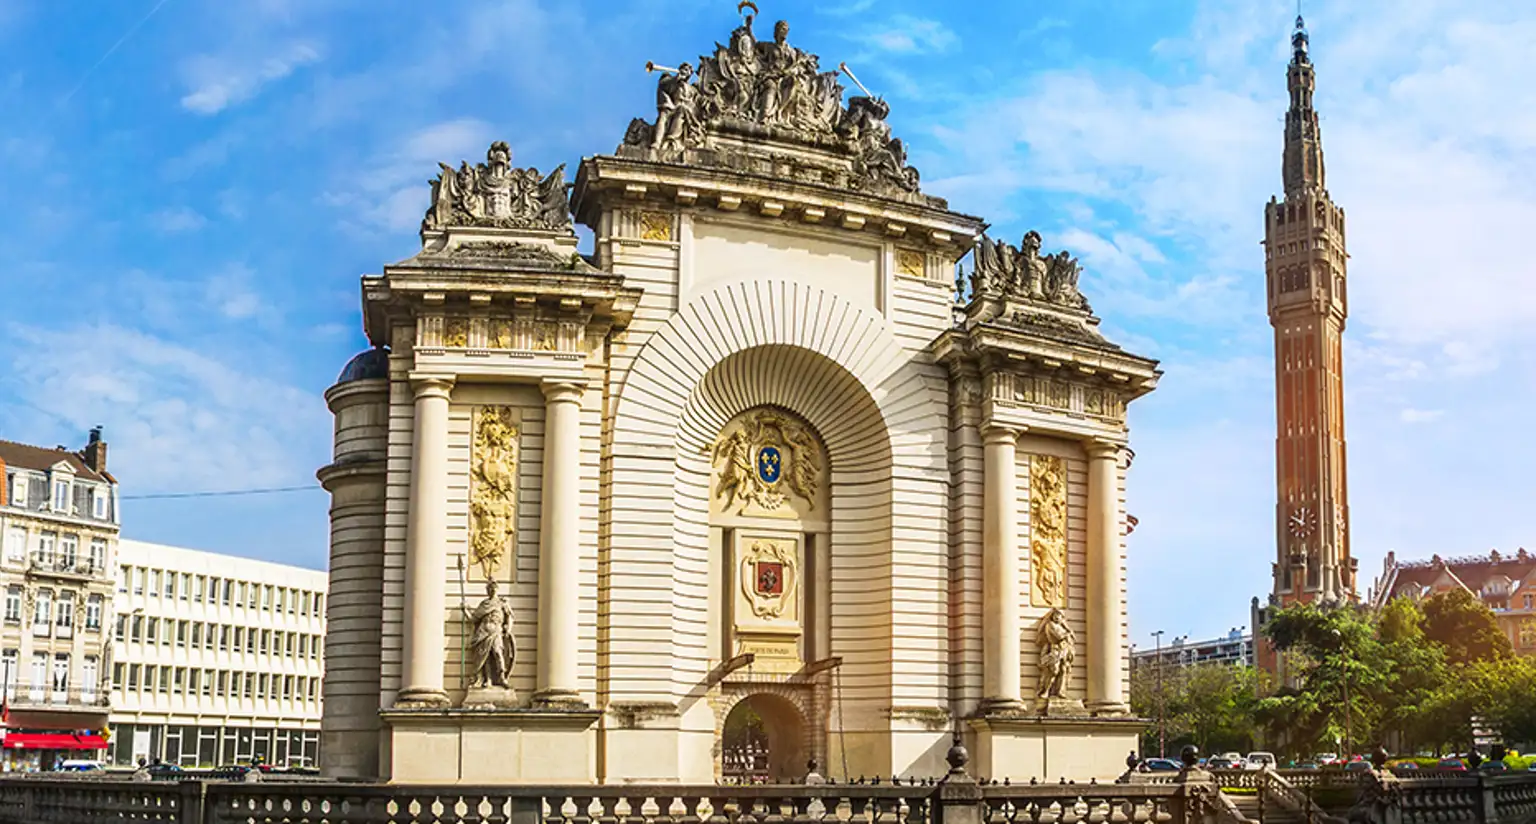 Things to see and do in Lille